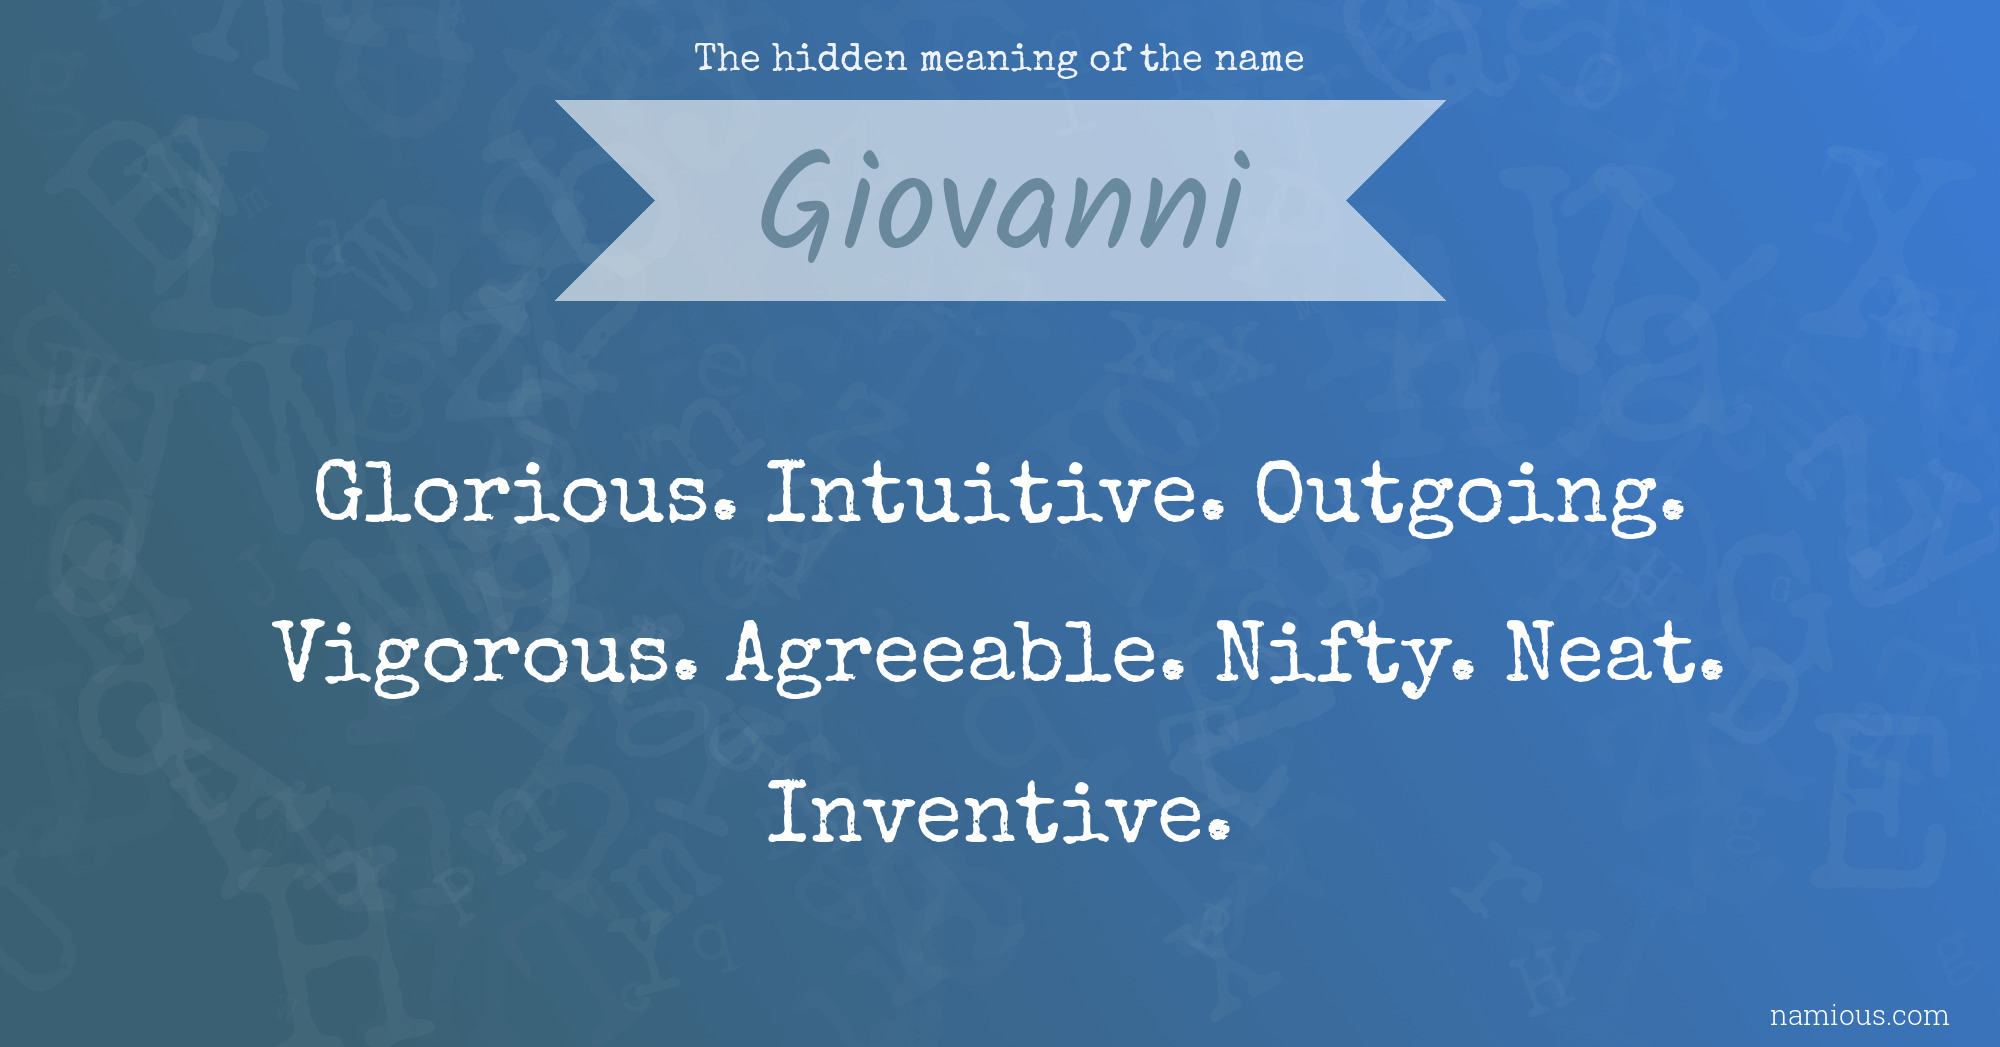 The hidden meaning of the name Giovanni